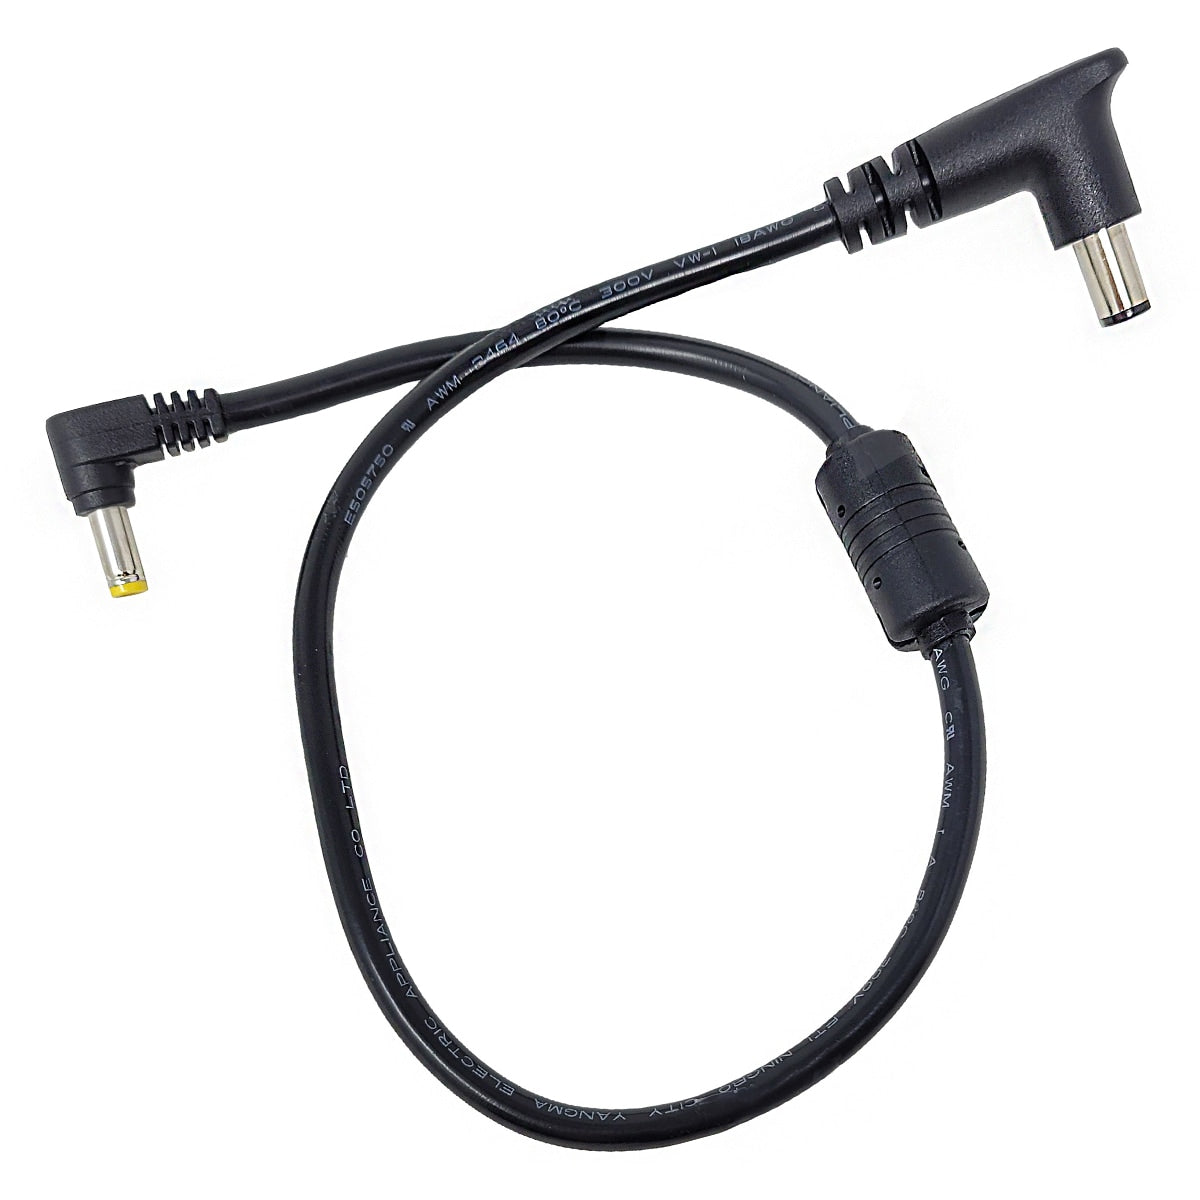 DreamStation 2 Adapter Cable for Pilot-12 Lite CPAP Battery Packs